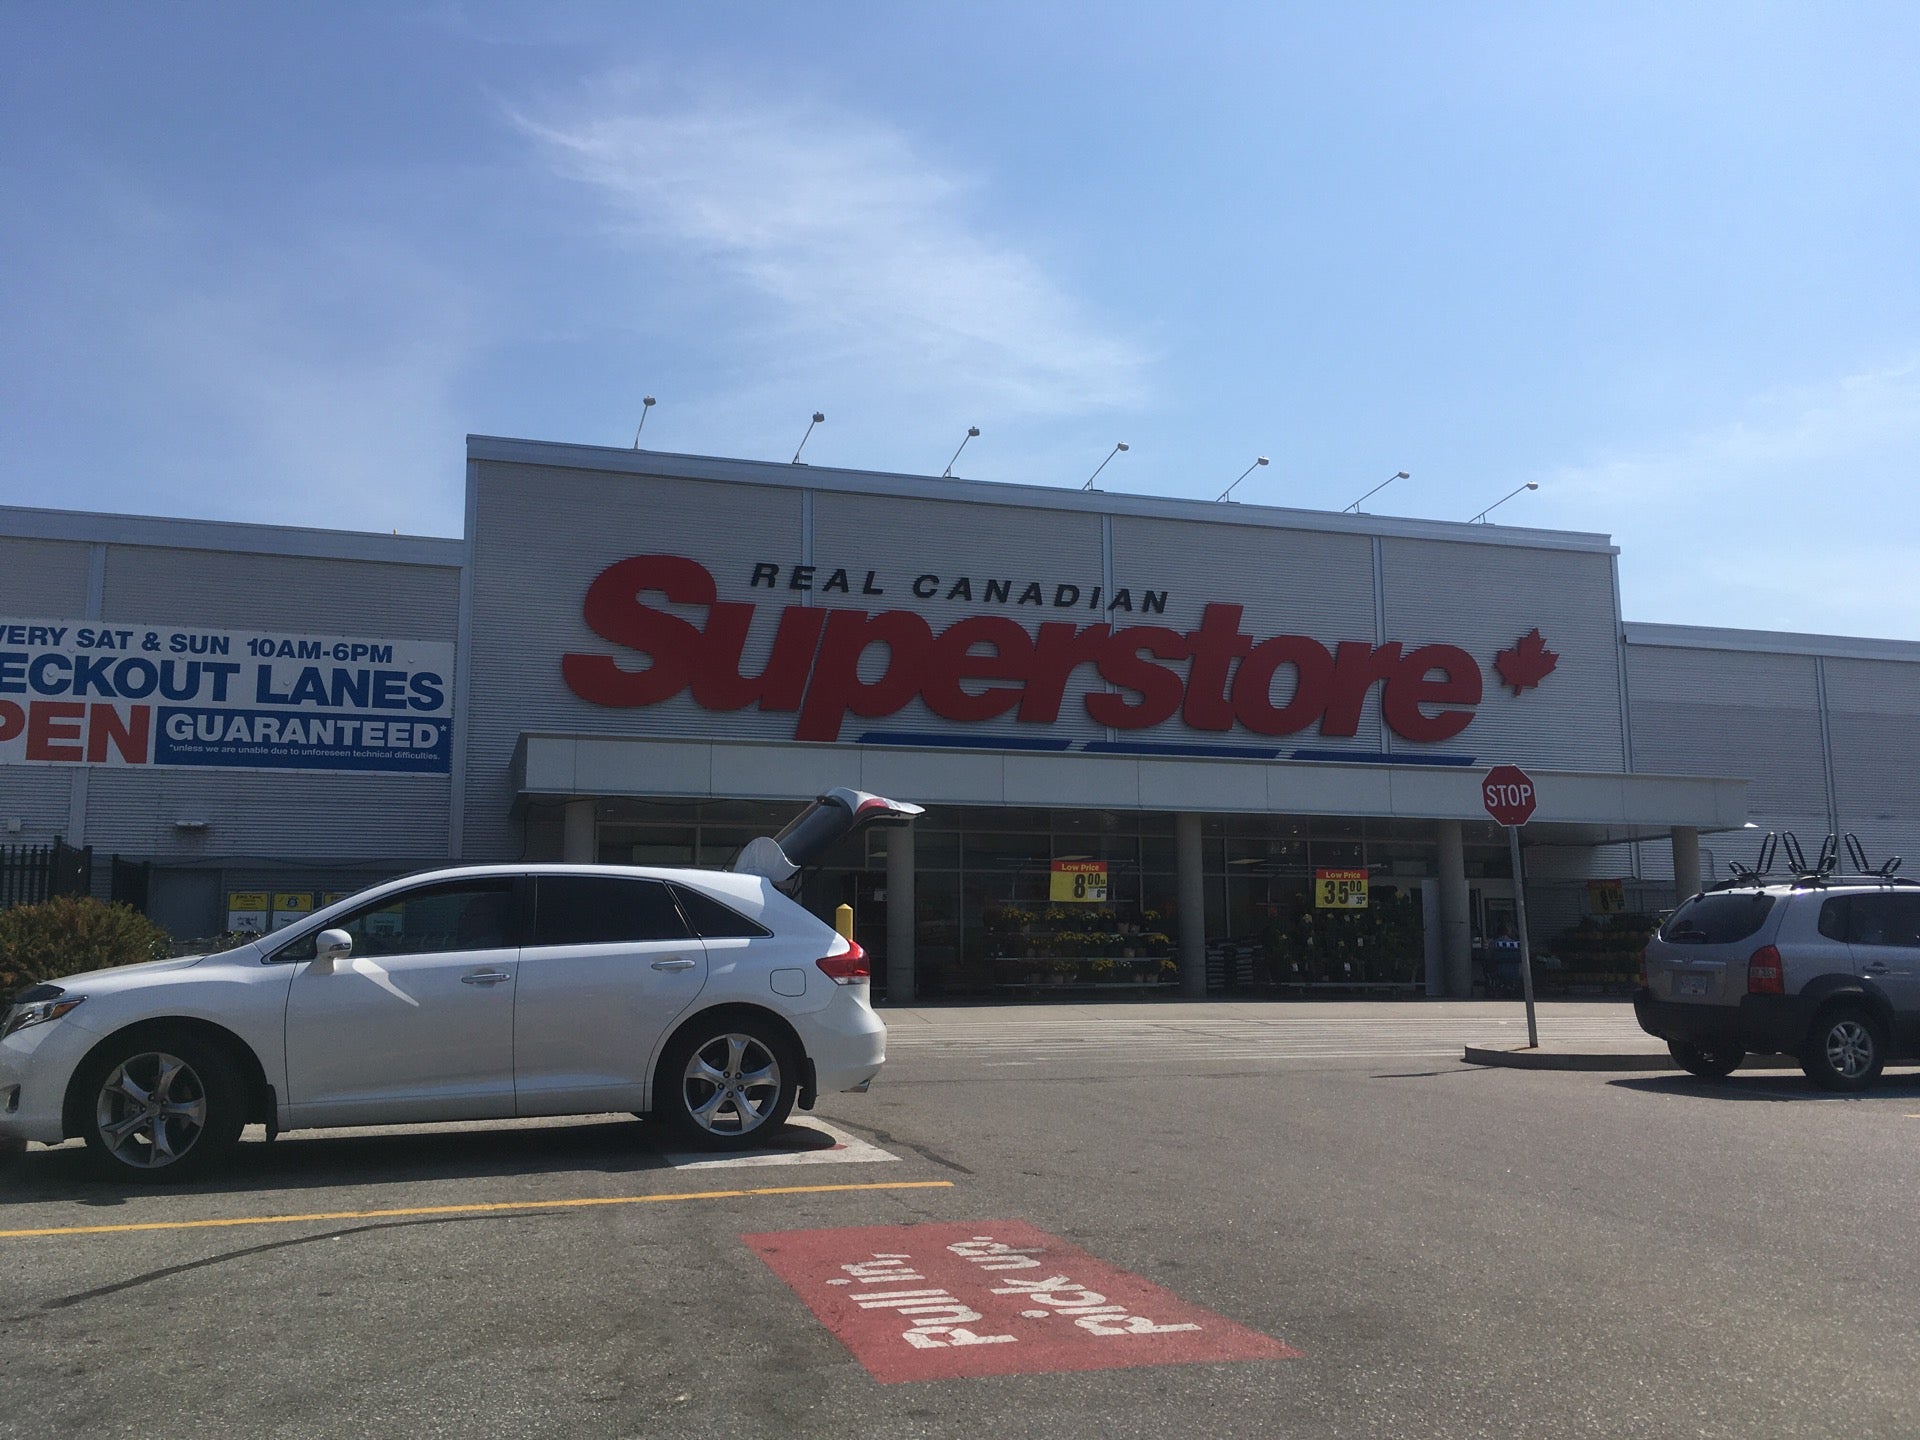 Real Canadian Superstore 2210 Main St Penticton Bc Mapquest 4816